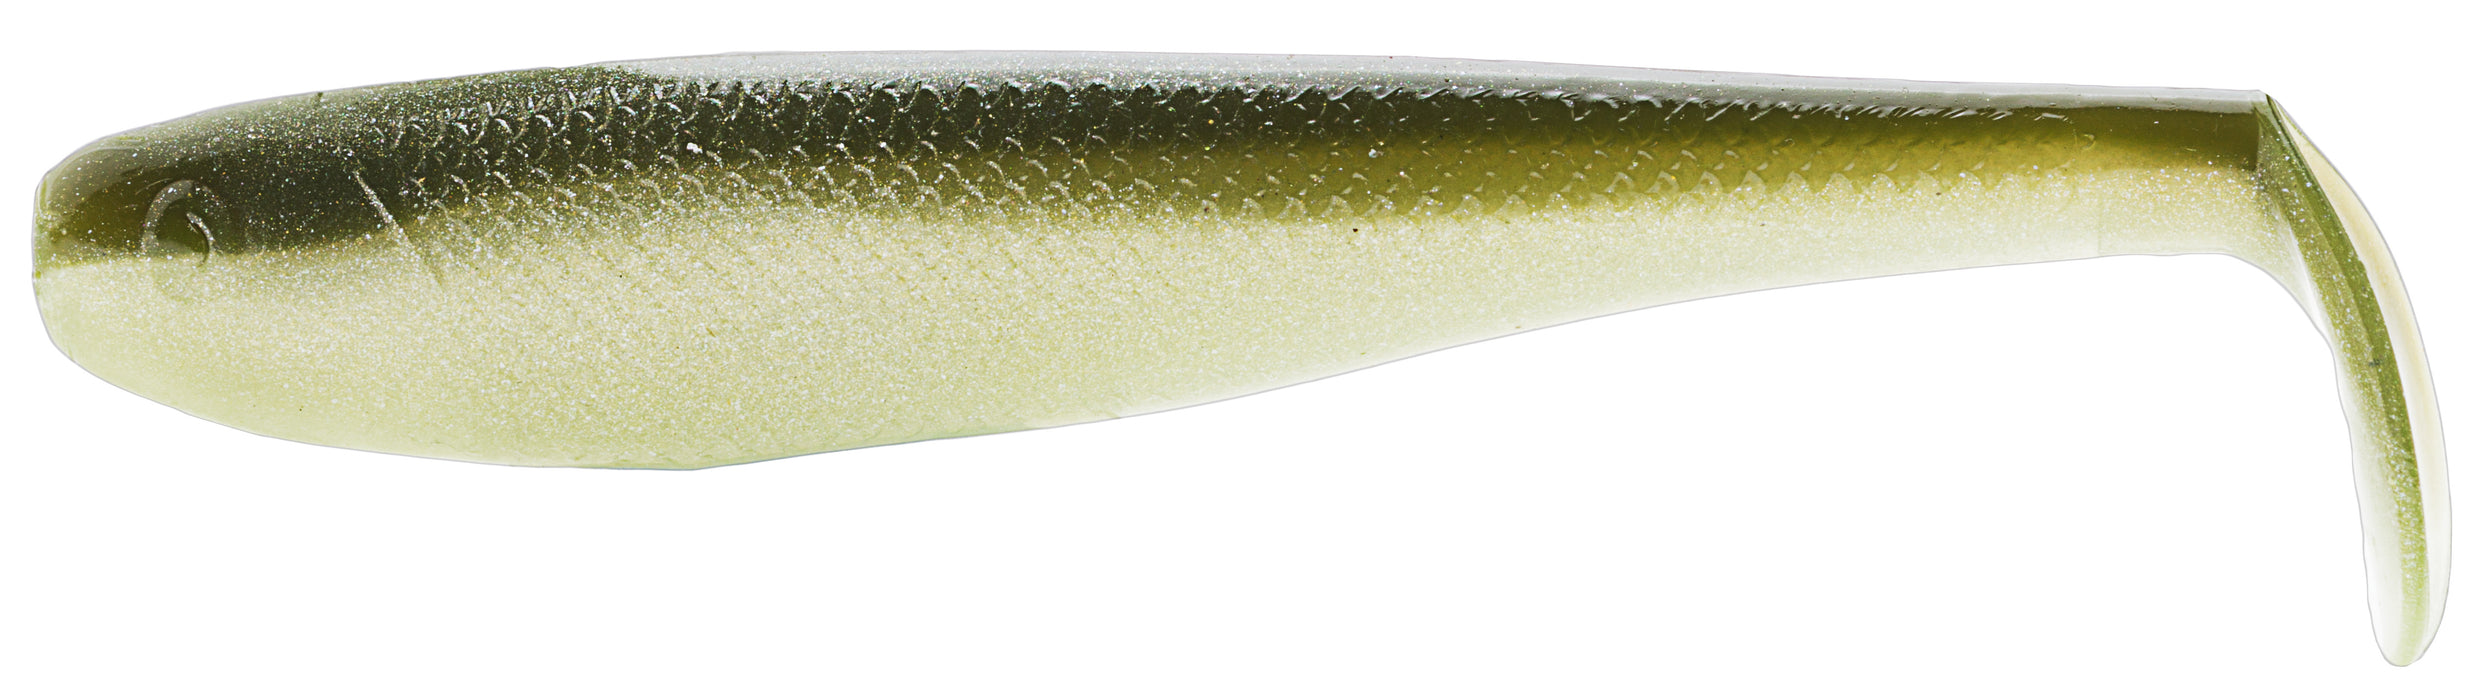 Z-Man SwimmerZ 6 inch Paddle Tail Swimbait 3 pack